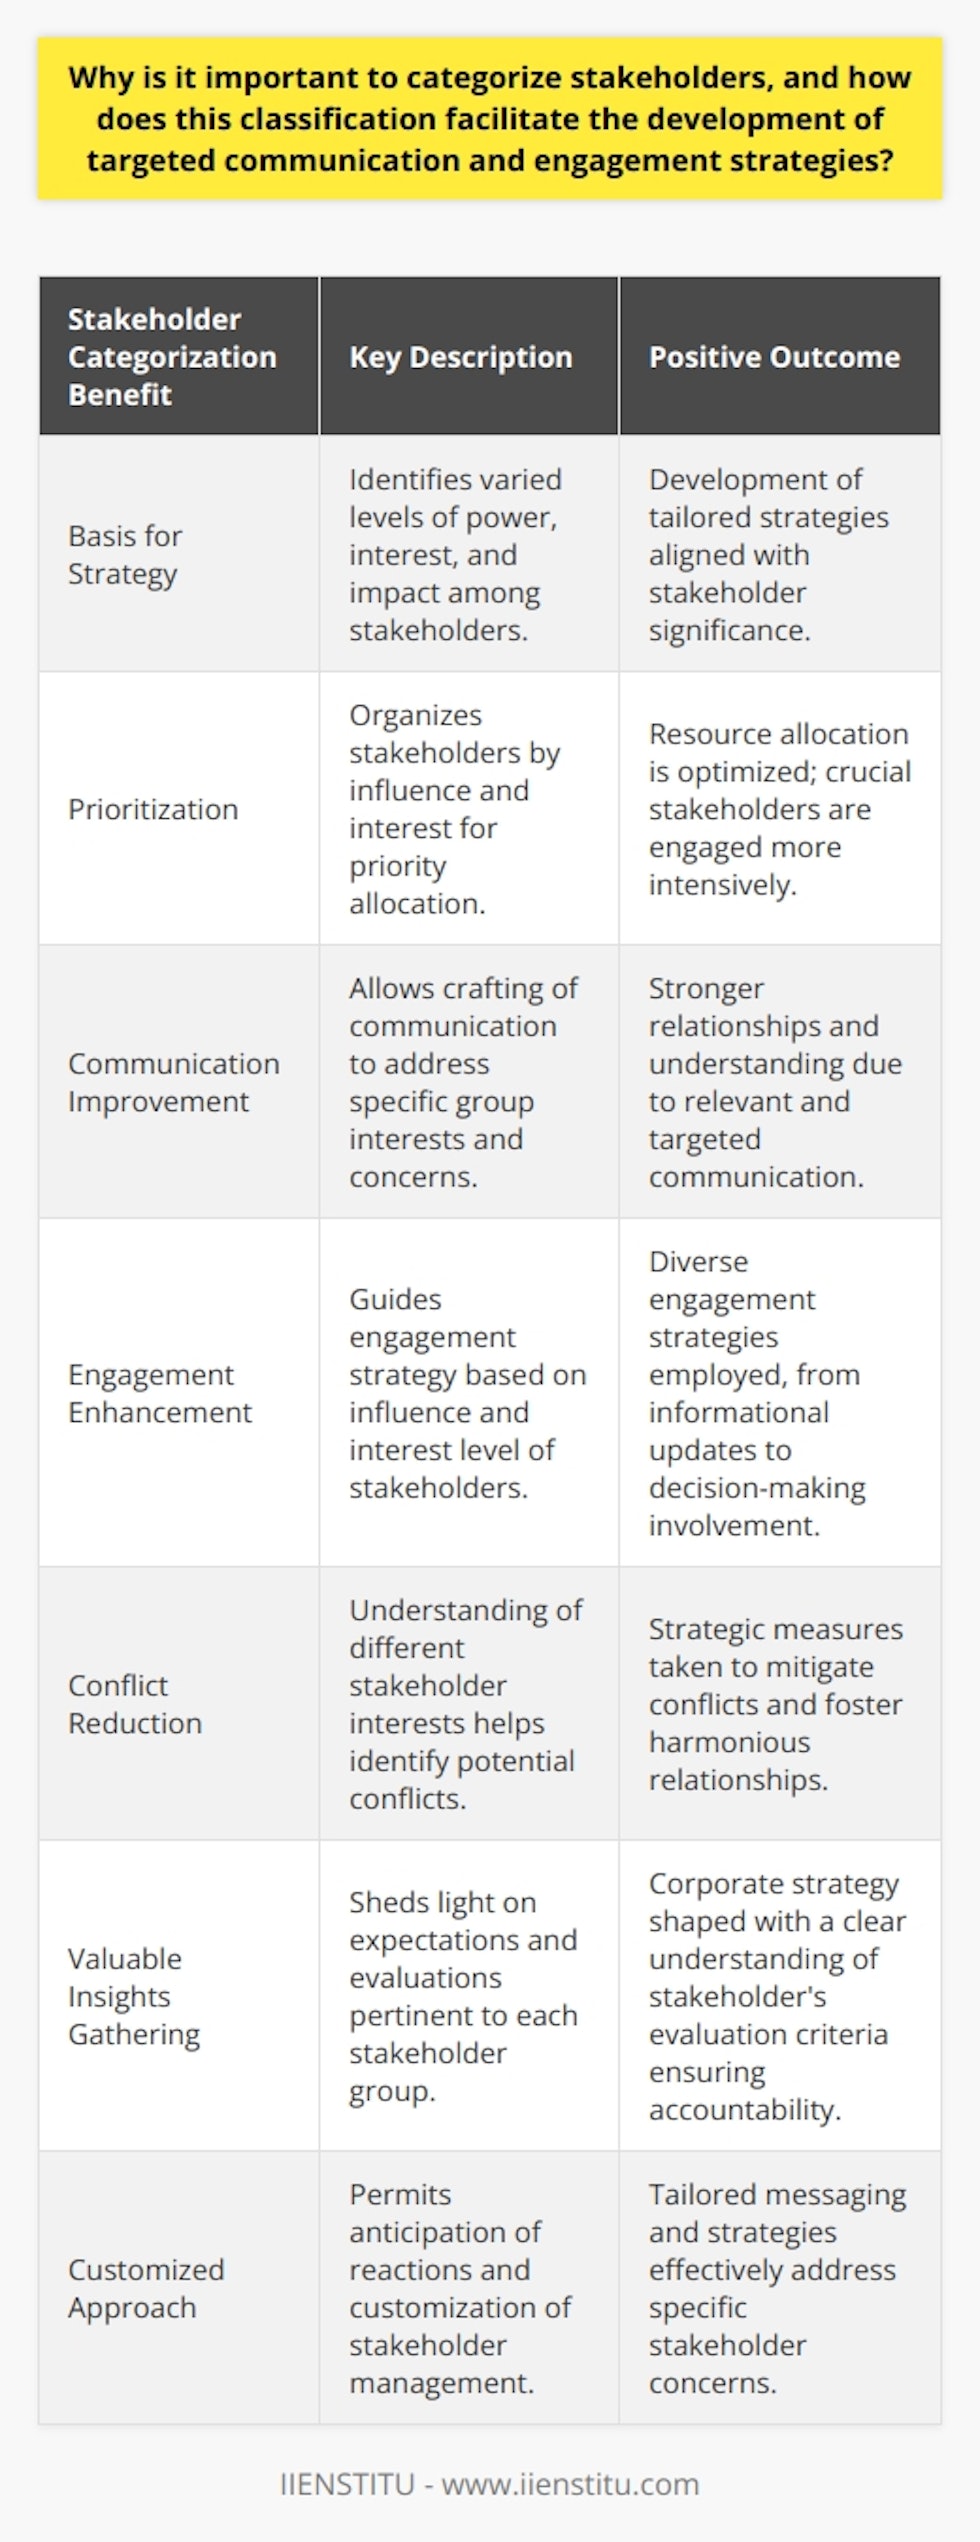 Understanding the importance of stakeholder categorization is crucial for any organization that aims to manage its stakeholder relationships effectively. Stakeholders can be individuals, groups, or entities with direct or indirect interest in the organization's activities, and their influence can affect the organization's outcomes significantly.Categorization as a Basis for StrategyBy categorizing stakeholders, an organization can decipher the complexity of its stakeholder universe. Different stakeholders may have varying levels of power, interest, and impact related to business operations. For example, employees, customers, suppliers, investors, community members, and governmental bodies might all be stakeholders, but their needs and influences are diverse. Categorizing these stakeholders can help in acknowledging their significance and devising tailored strategies.Facilitates PrioritizationProper classification allows an organization to prioritize stakeholders based on their level of influence and interest. It also ensures that resources are allocated efficiently, by focusing on engaging the most critical stakeholders more intensively. The Power/Interest Grid, for instance, is a popular tool for this type of analysis.Improvement of CommunicationWhen stakeholders are categorized, communication can be crafted to suit the specific interests and concerns of each group. This targeted approach is likely to be more effective than a one-size-fits-all strategy, as it addresses the unique expectations and provides relevant information – thus fostering a clearer understanding and stronger relationships.Enhances EngagementBy recognizing the stakeholder's level of interest and ability to influence the organization, categorization guides how to best engage with each group. Engagement strategies can range from keeping a stakeholder informed to actively involving them in decision-making processes.Reduces ConflictSince potential conflicting interests between different stakeholder groups are identified through the categorization process, measures can be taken to mitigate these conflicts. Understanding the motivations behind stakeholder perspectives is key to developing a harmonious relationship and achieving consensus wherever possible.Gathers Valuable InsightsStakeholder categorization illuminates the expectations and evaluation criteria each group might have regarding the organization. This understanding is invaluable for shaping corporate strategy, measuring performance, and ensuring accountability.Ensures Customized ApproachCategorization empowers organizations to not only anticipate reactions but also to customize their approach to manage stakeholders effectively. It allows for tailored messaging and communication strategies that cater to specific concerns and questions pertinent to the stakeholder group in question.In conclusion, the categorization of stakeholders is a vital step in crafting and implementing targeted communication and engagement strategies. It heightens the efficacy of interactions with diverse stakeholder groups, minimizes conflicts, and ultimately serves as a foundation for an organization's sustainability and success. With a robust understanding of stakeholders, organizations like IIENSTITU can tailor their approaches to align with their mission while satisfying the needs and expectations of those with a vested interest in their pursuits.